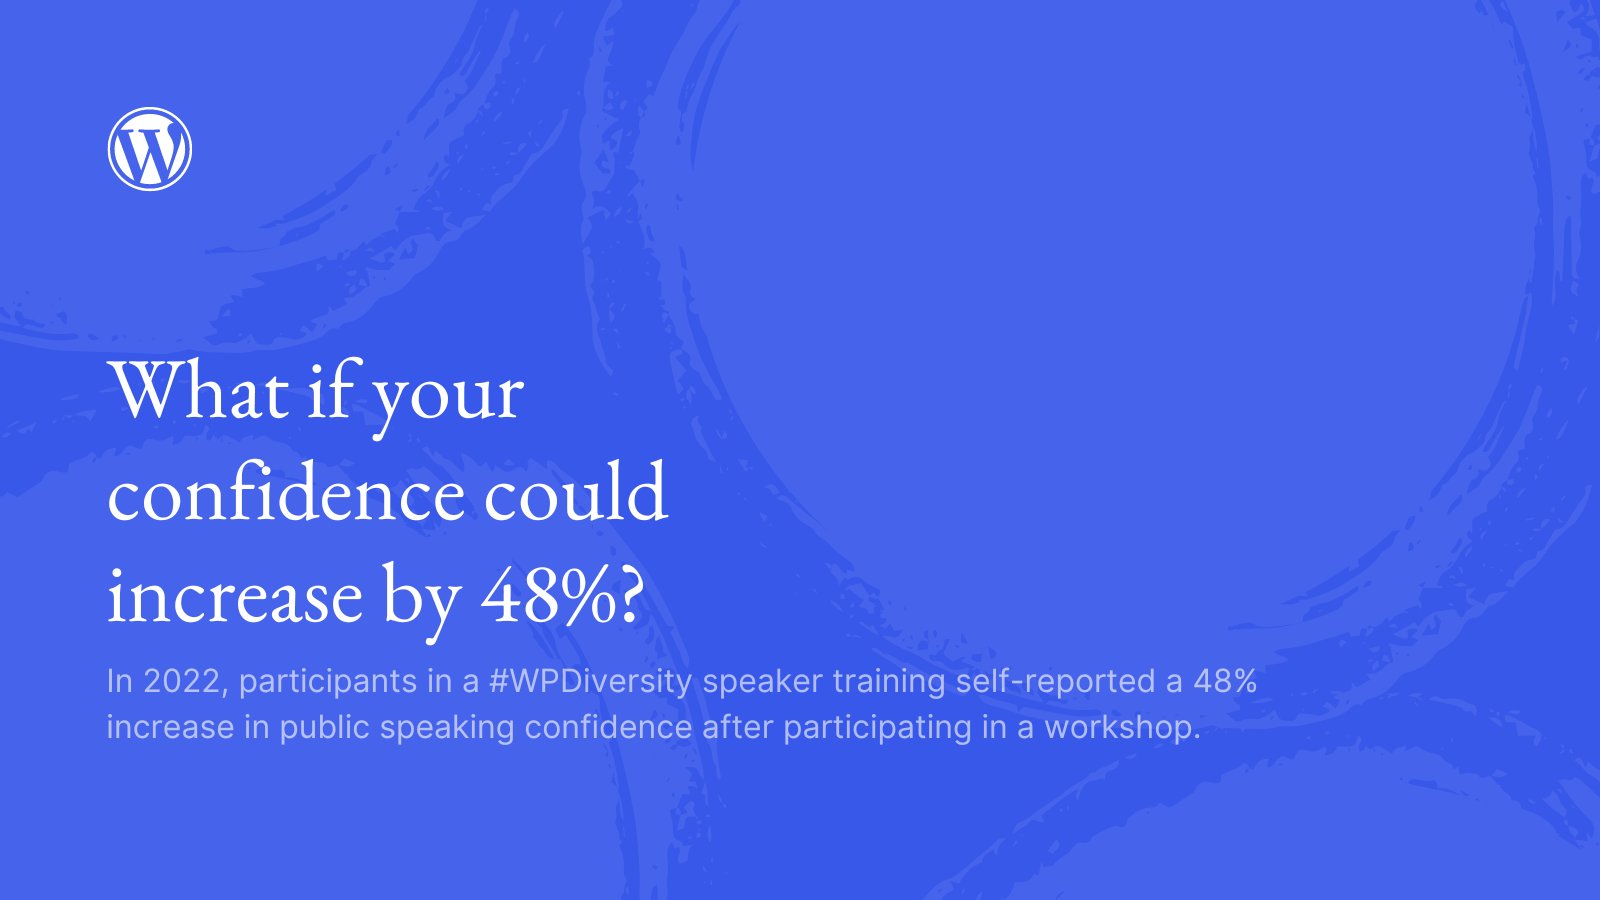 Dark blue background with light blue swirl detail and text, "What if your confidence could increase by 48%? In 2022, participants in a #WPDiversity speaker training self-reported a 48% increase in public speaking confidence."